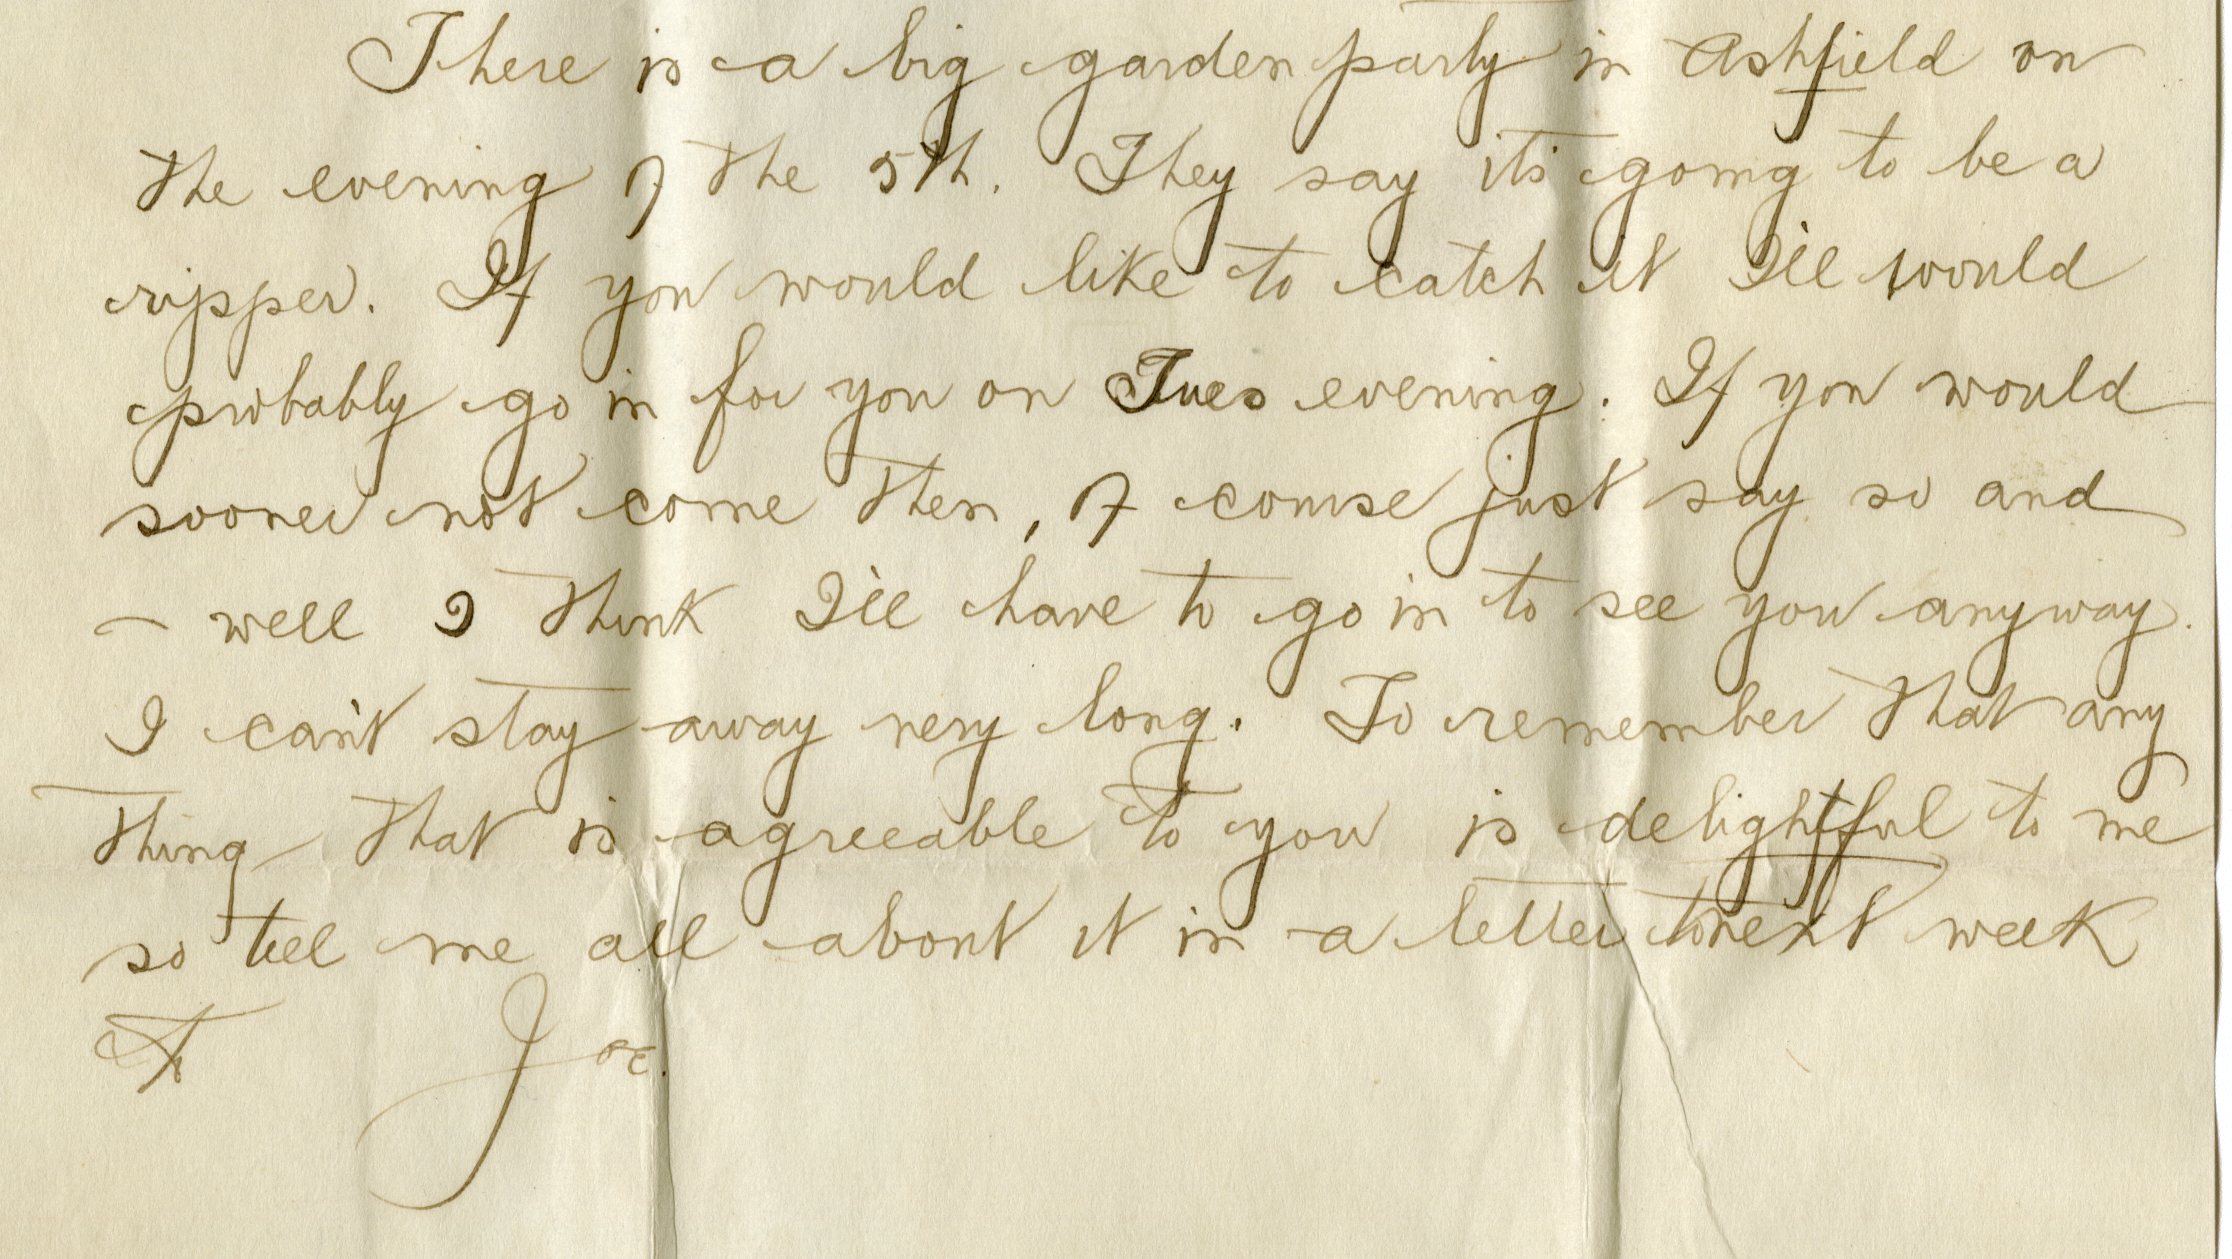 Excerpt from a letter to Mary Frances Griffin